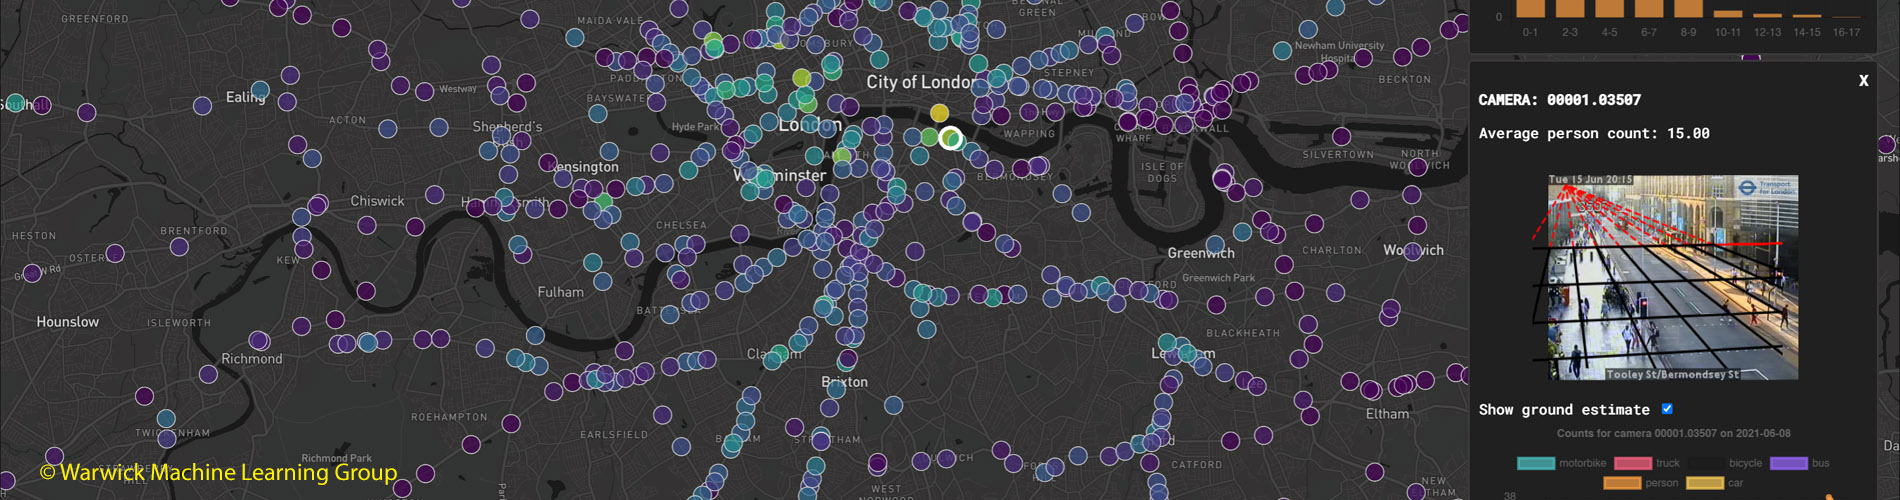 Map of London with dots showing density of traffic